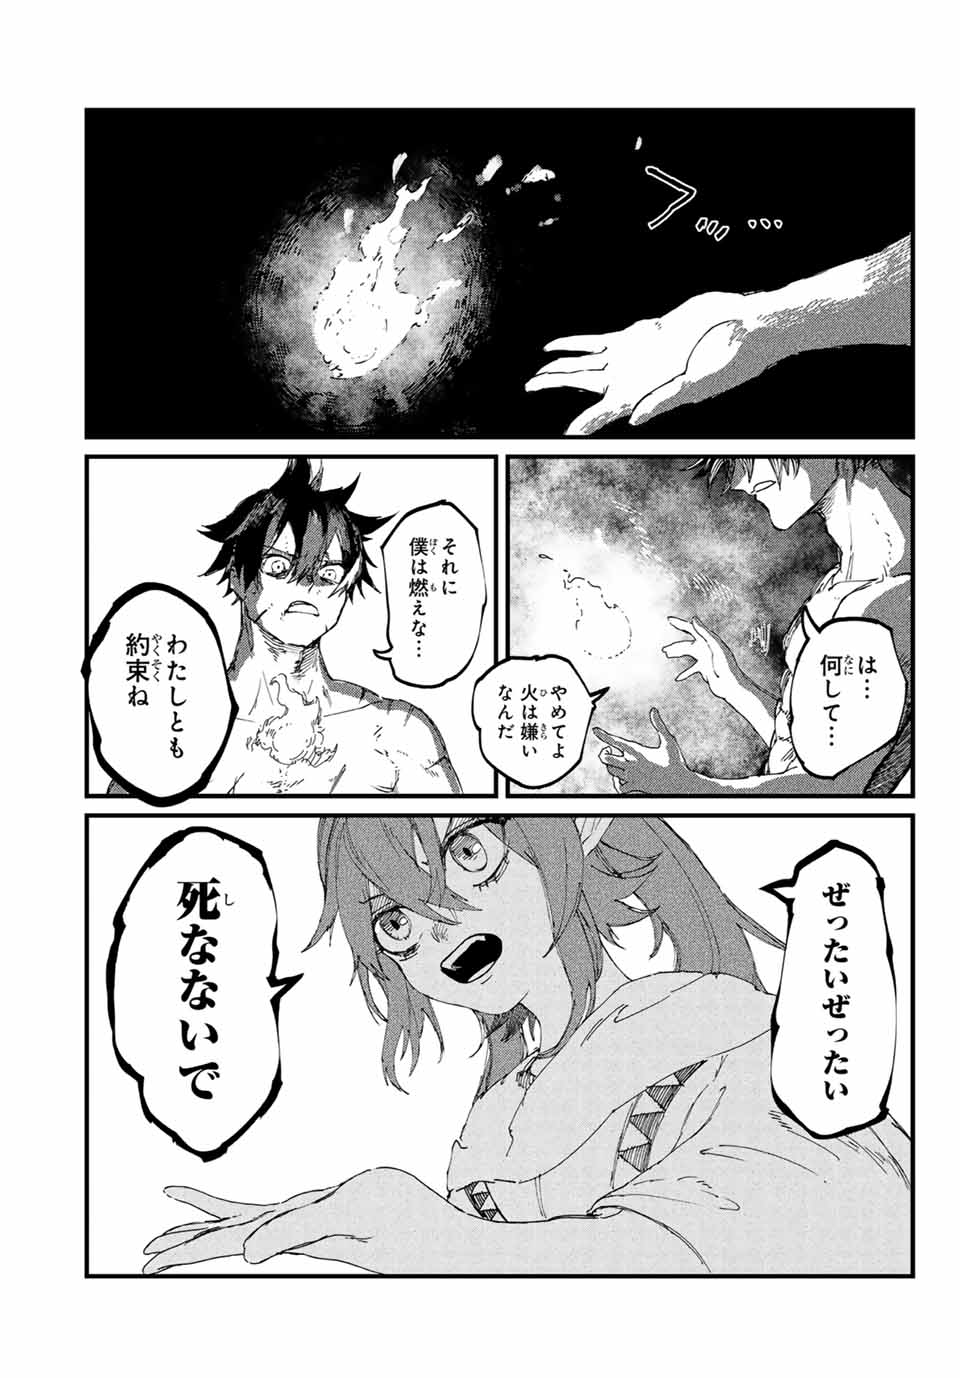 MAN OF RUST 第4話 - Page 23